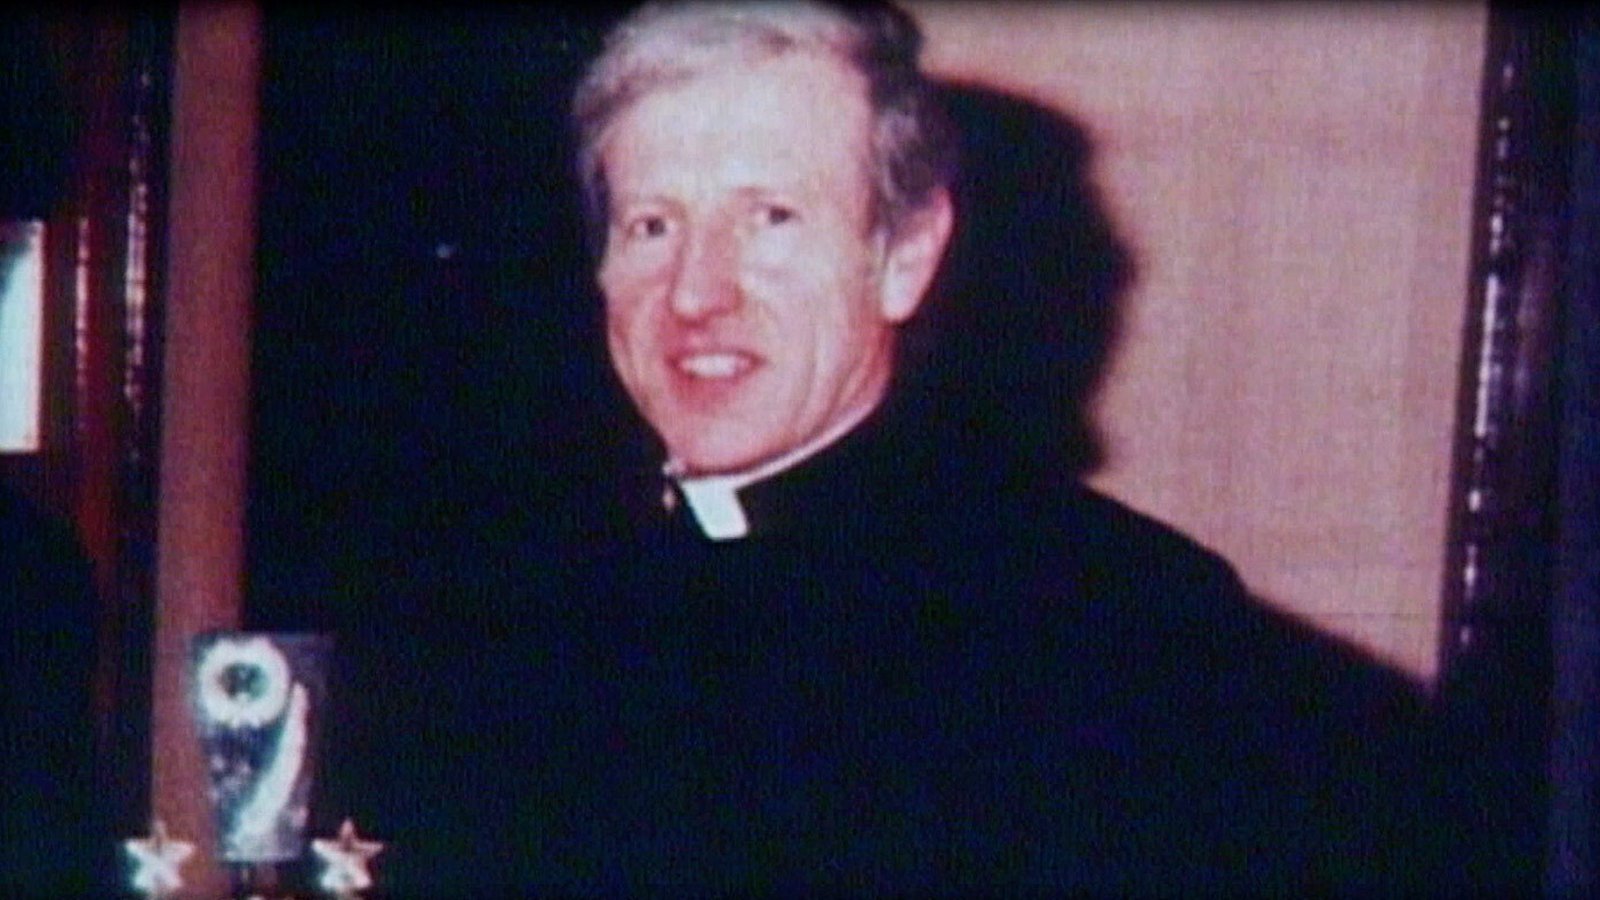 Image - Fr Niall Molloy suffered at least five or six blows, according to then-State Pathologist John Harbison